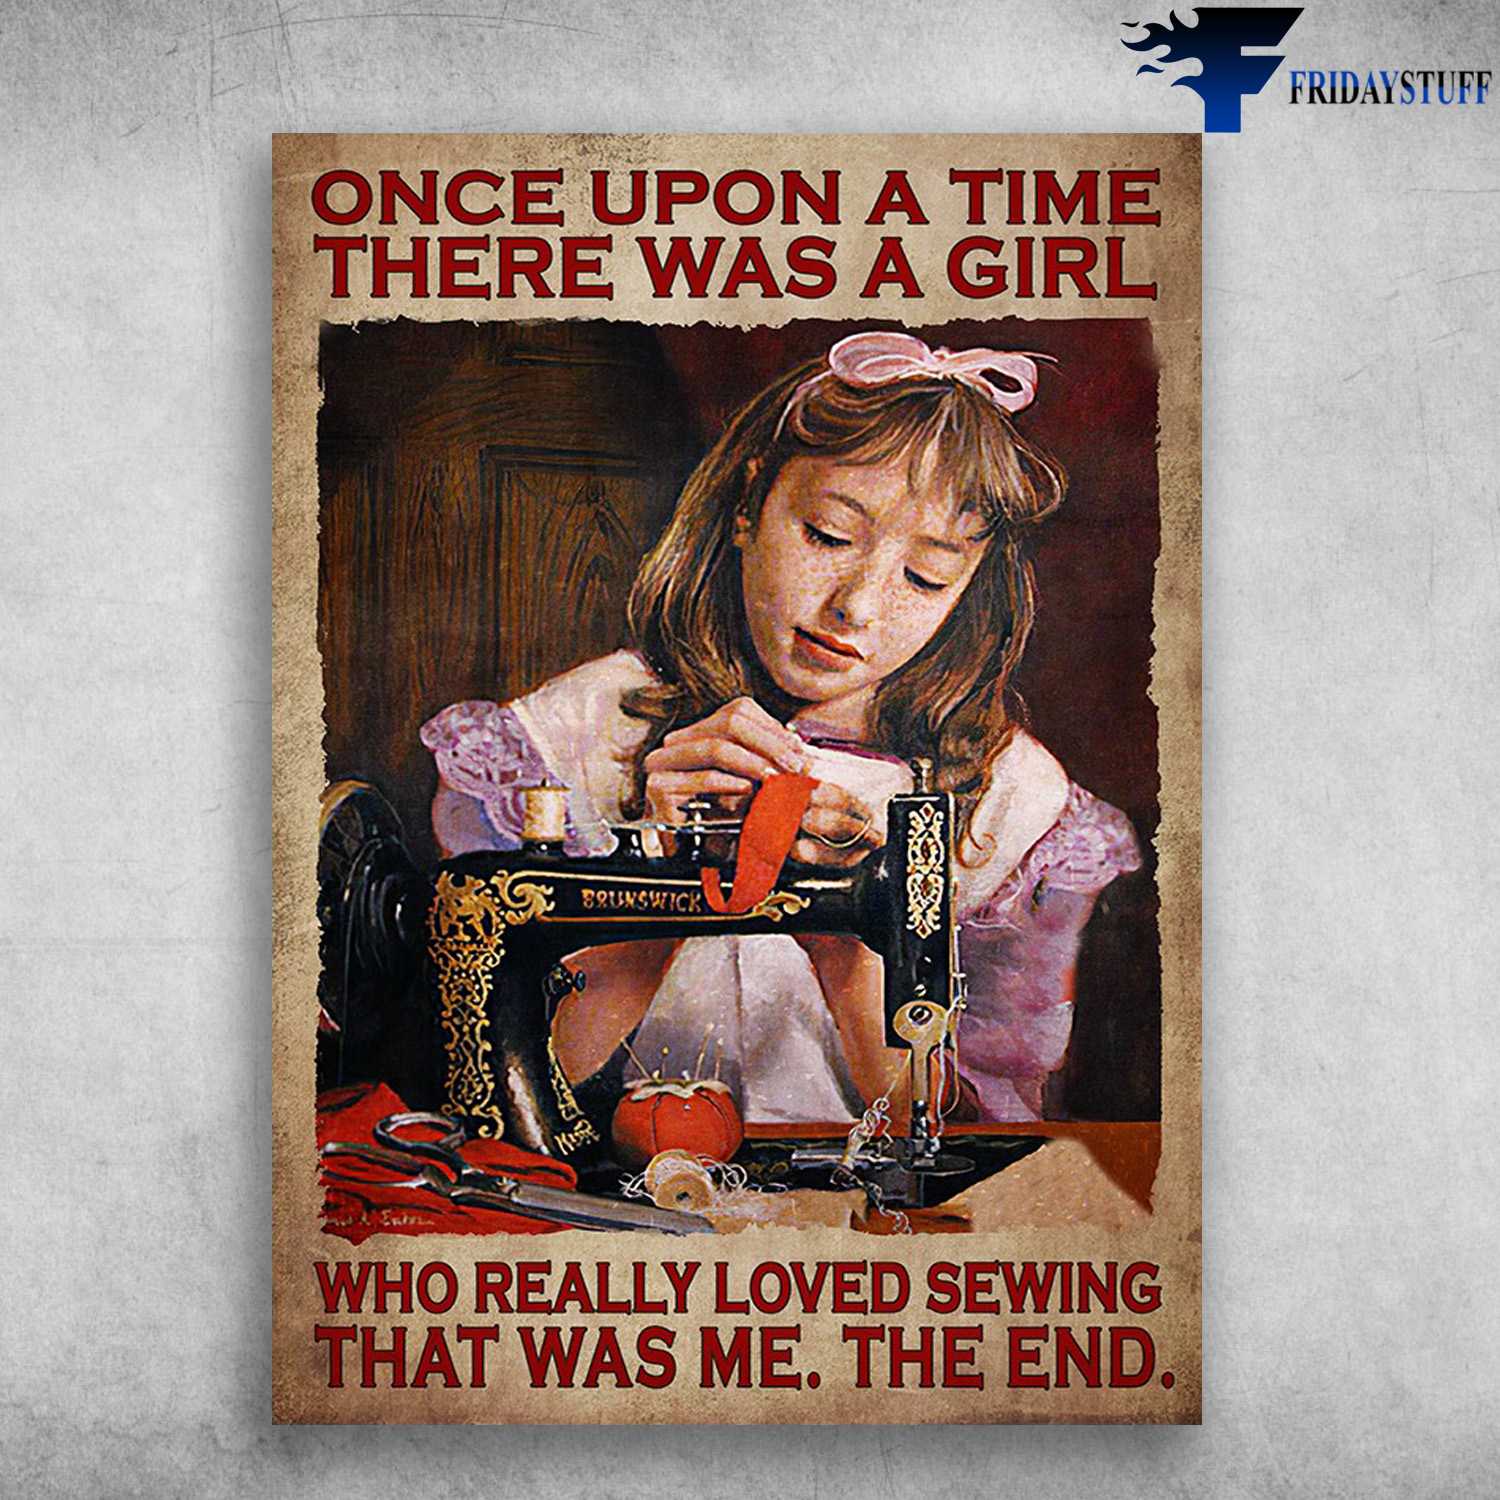 Sweing Girl - Once Upon A Time, There Was A Girl, Who Really Loved Sewing, That Was Me, The End